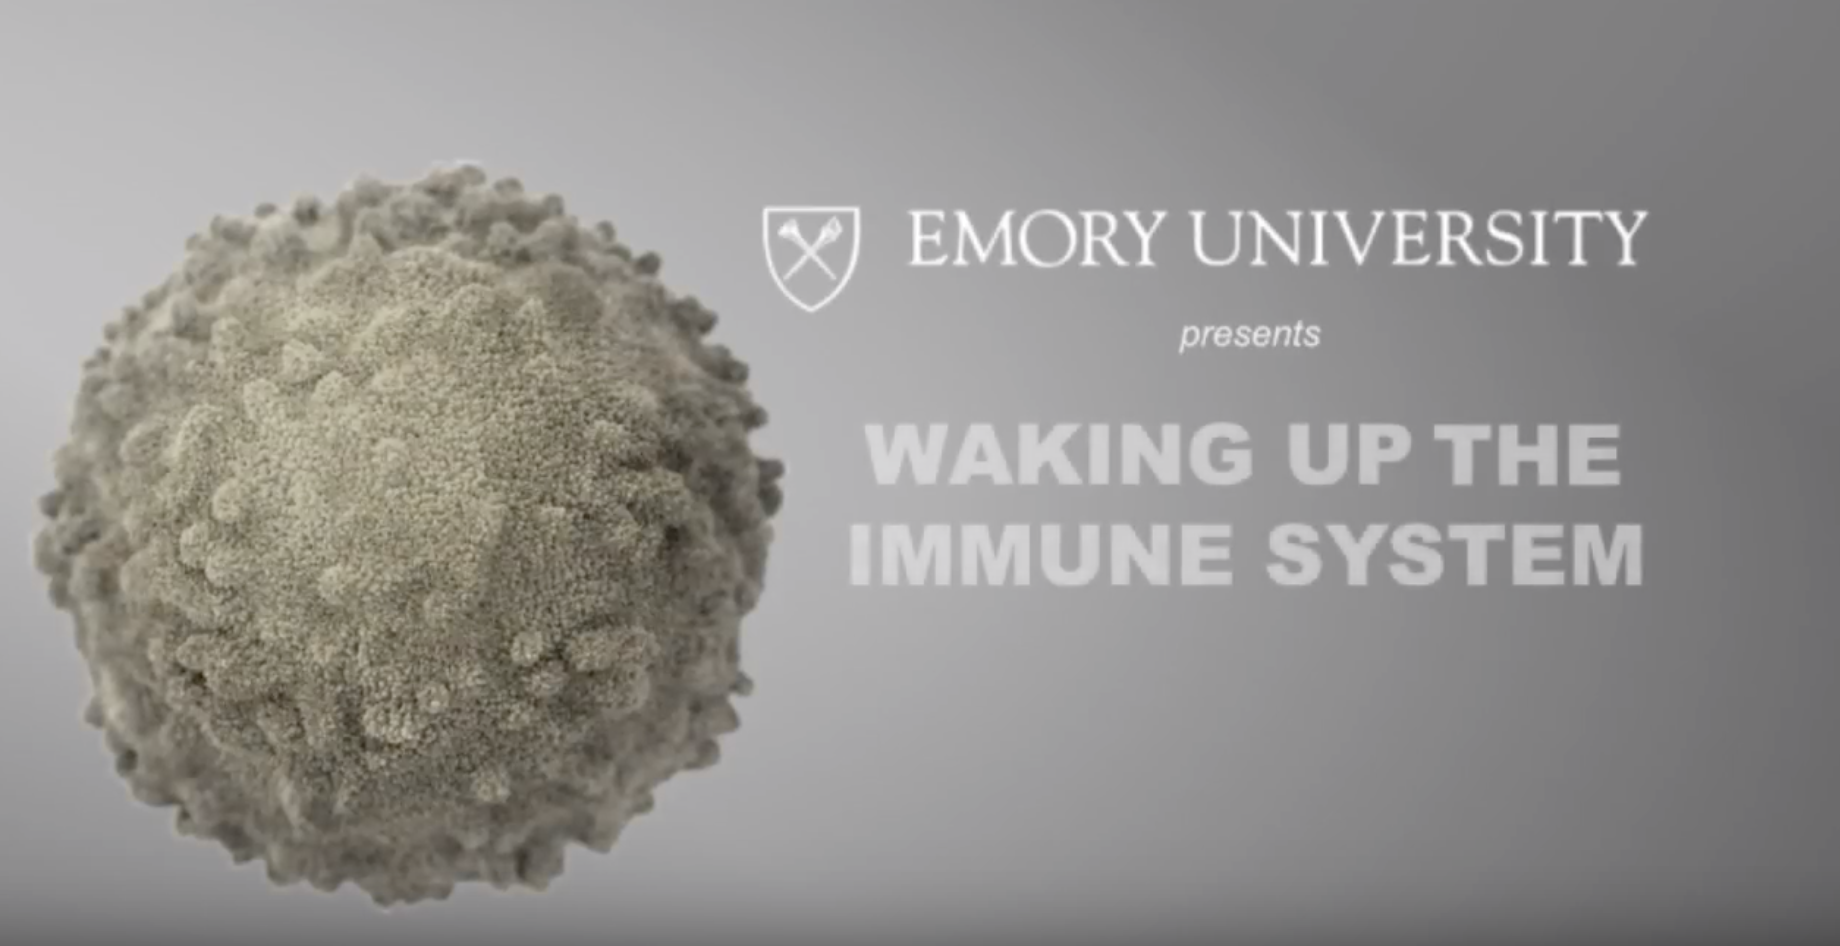 Screenshot of title of Waking Up the Immune System video